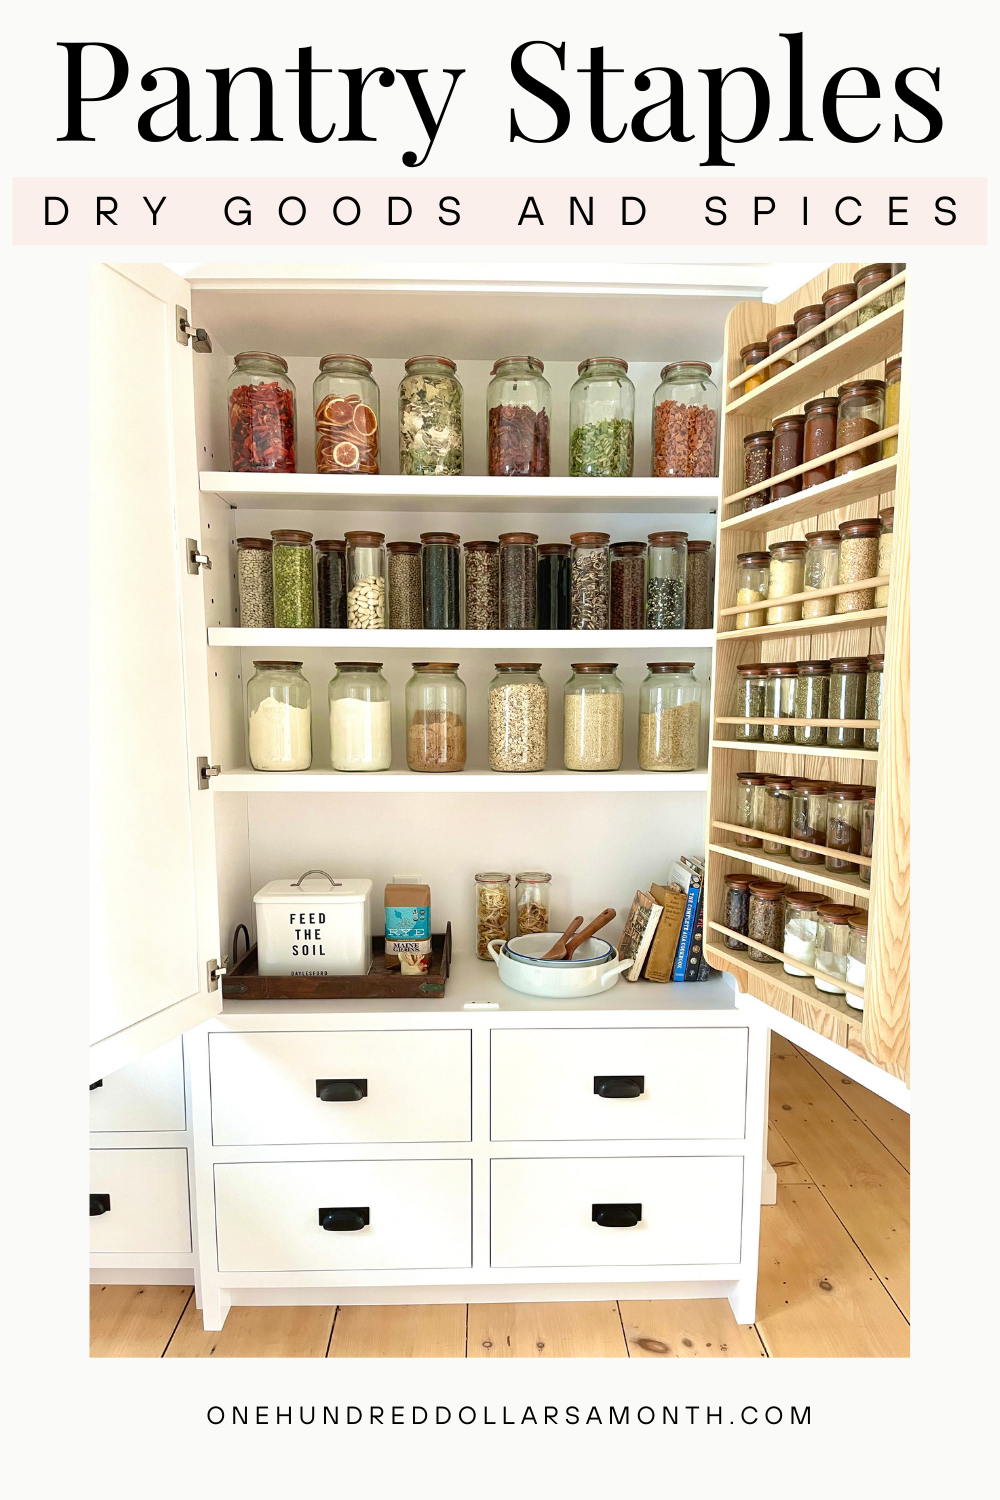 Pantry Staples: Dry Goods and Spices